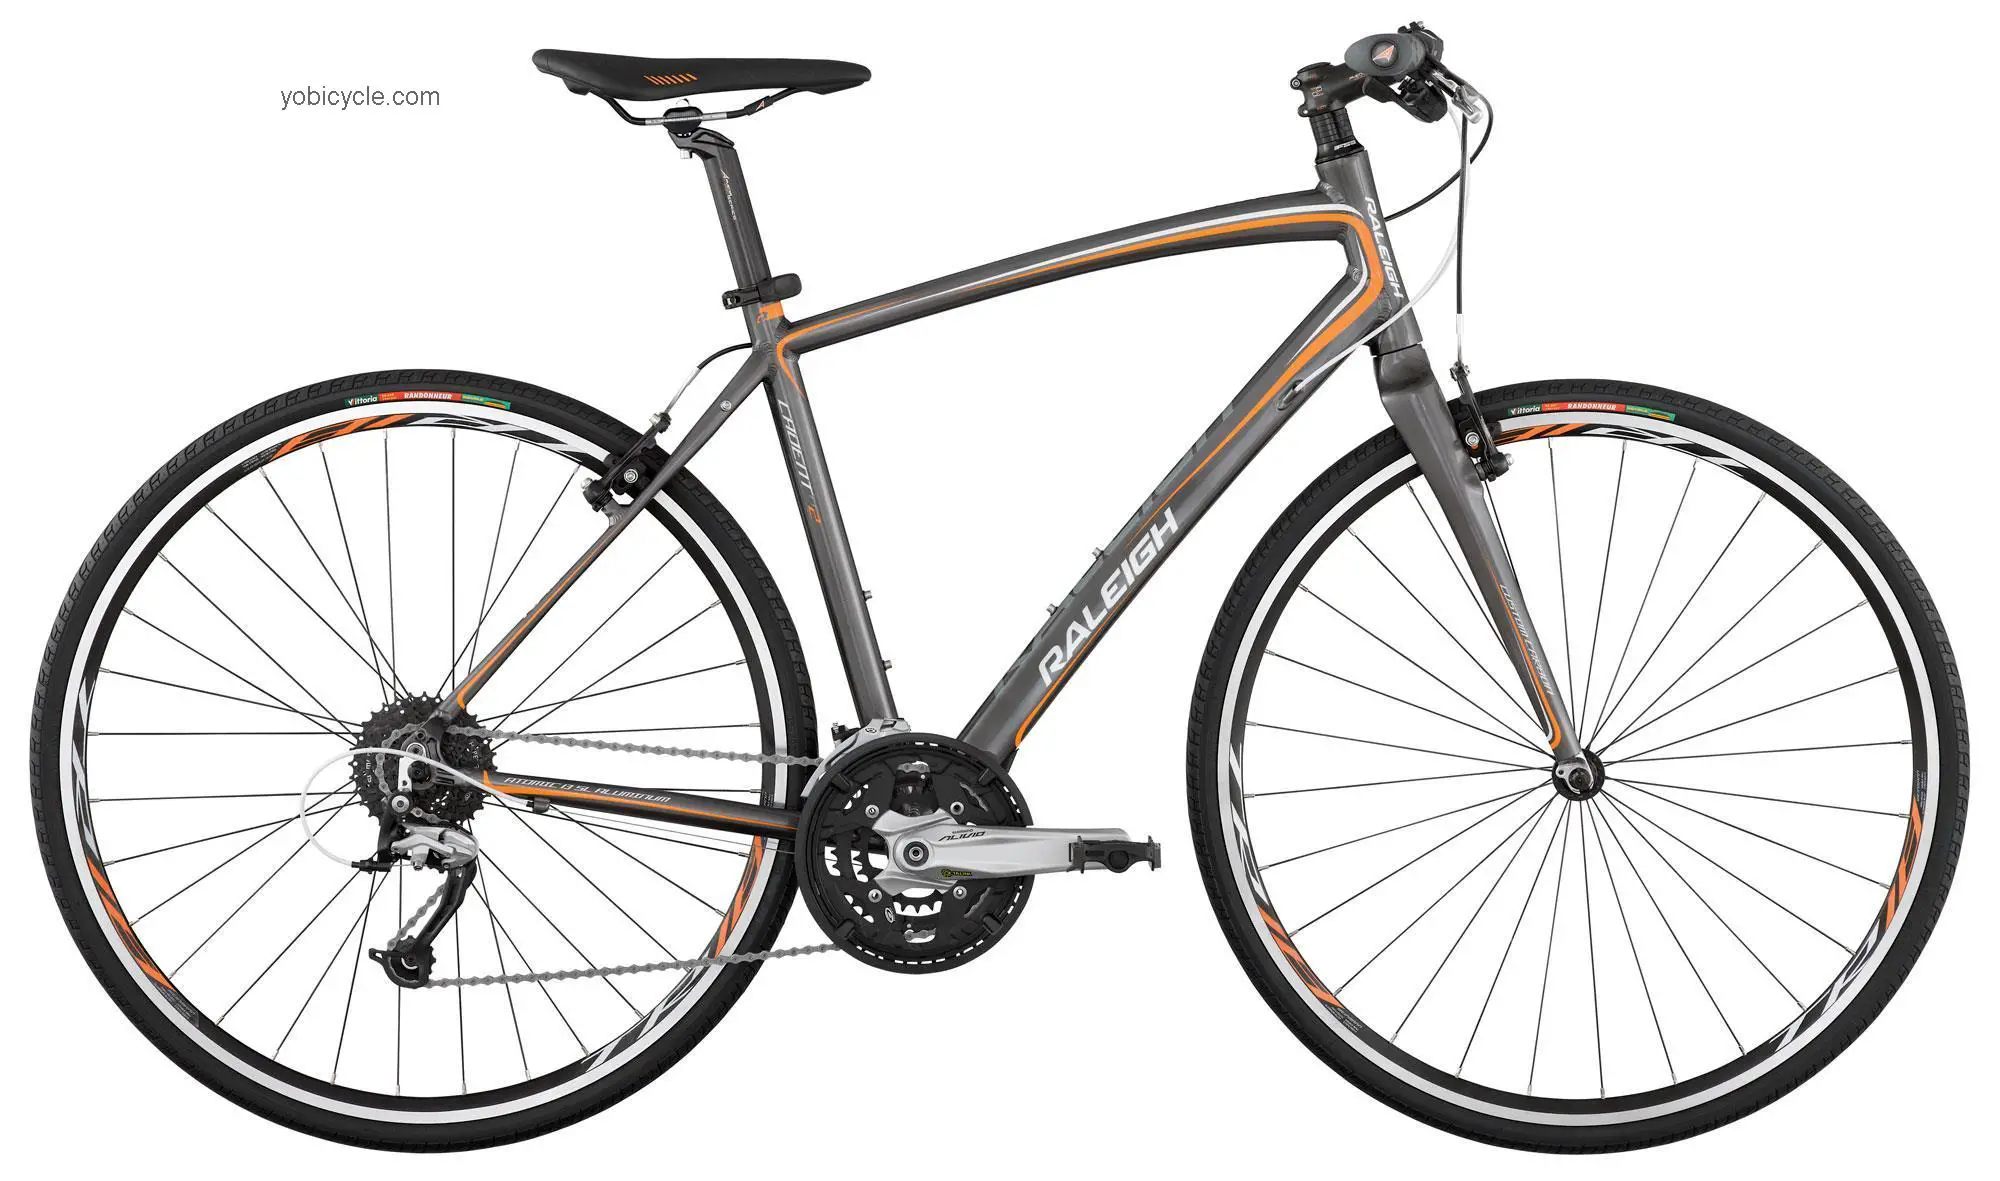 Raleigh Cadent FT2 2012 comparison online with competitors